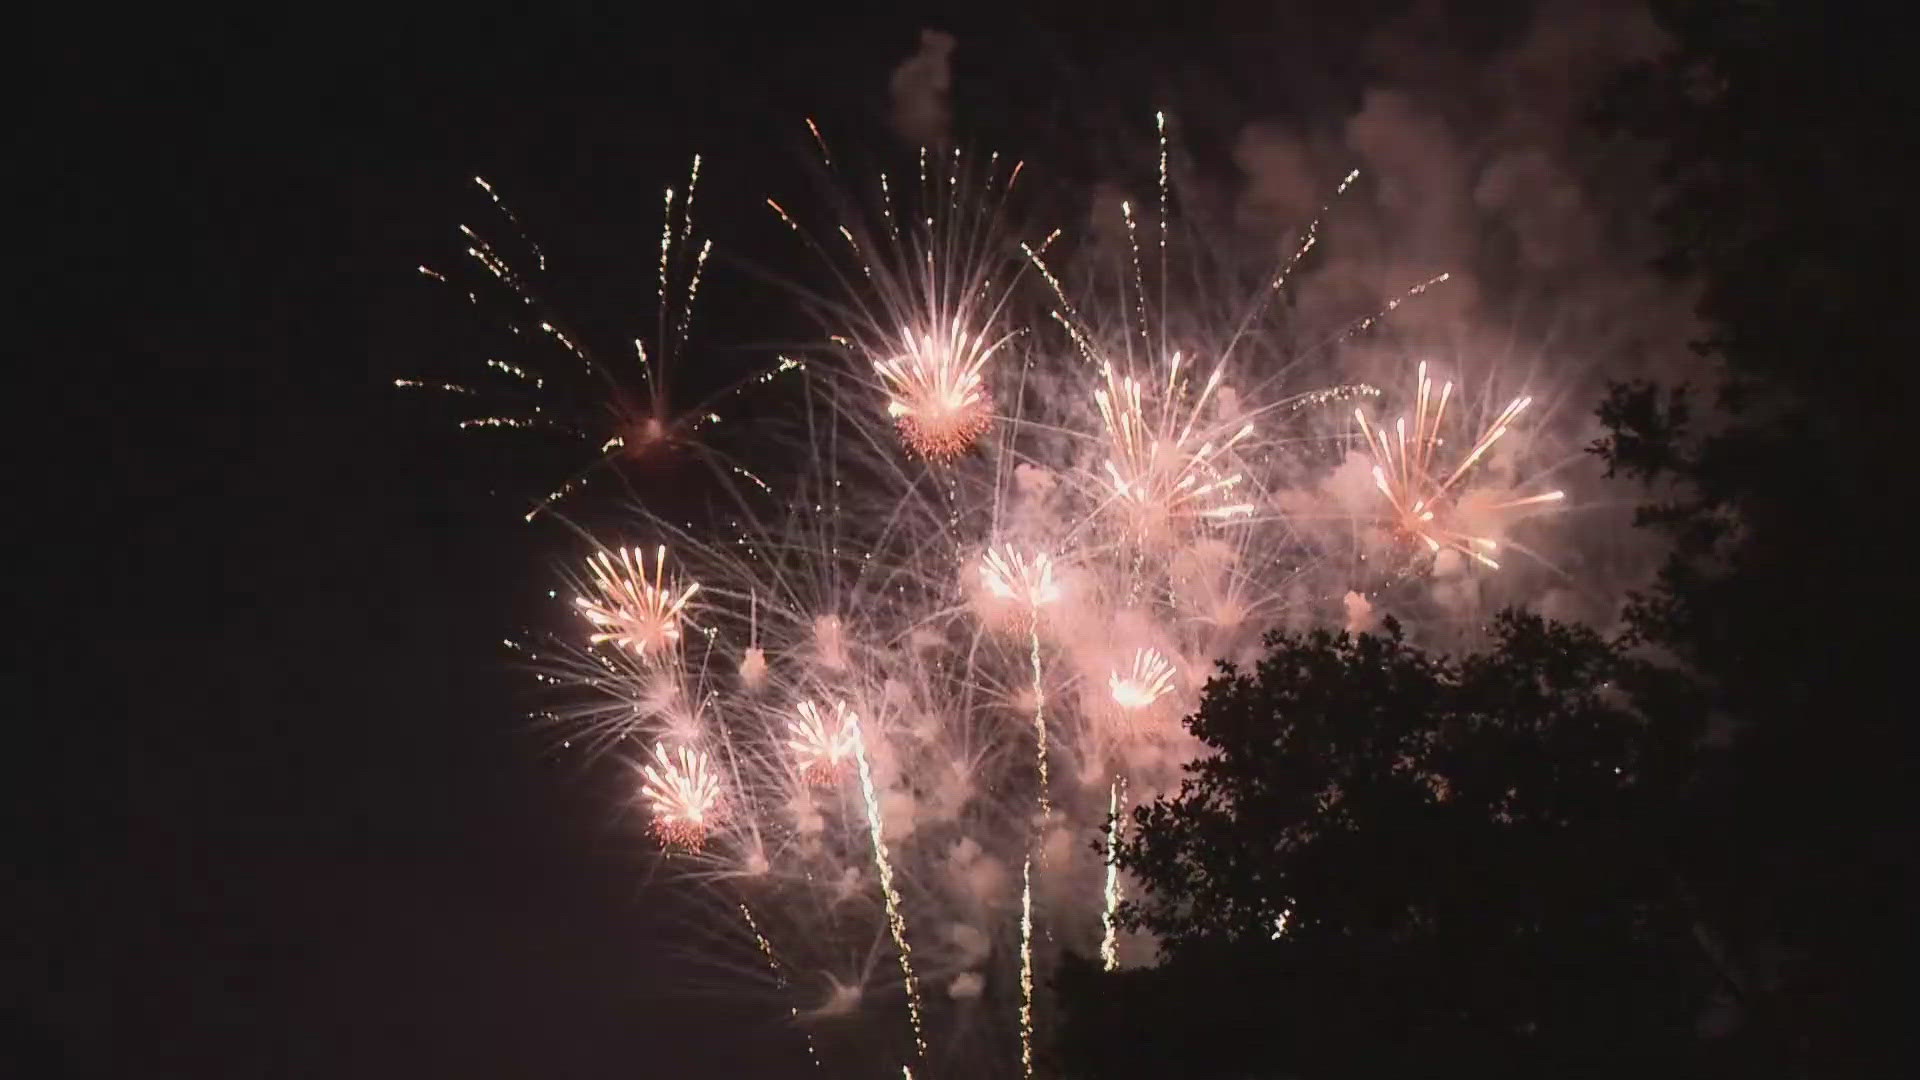 Rancho Cordova is doubling down on the Fourth of July celebrations, hosting one celebration Wednesday and another on Thursday.